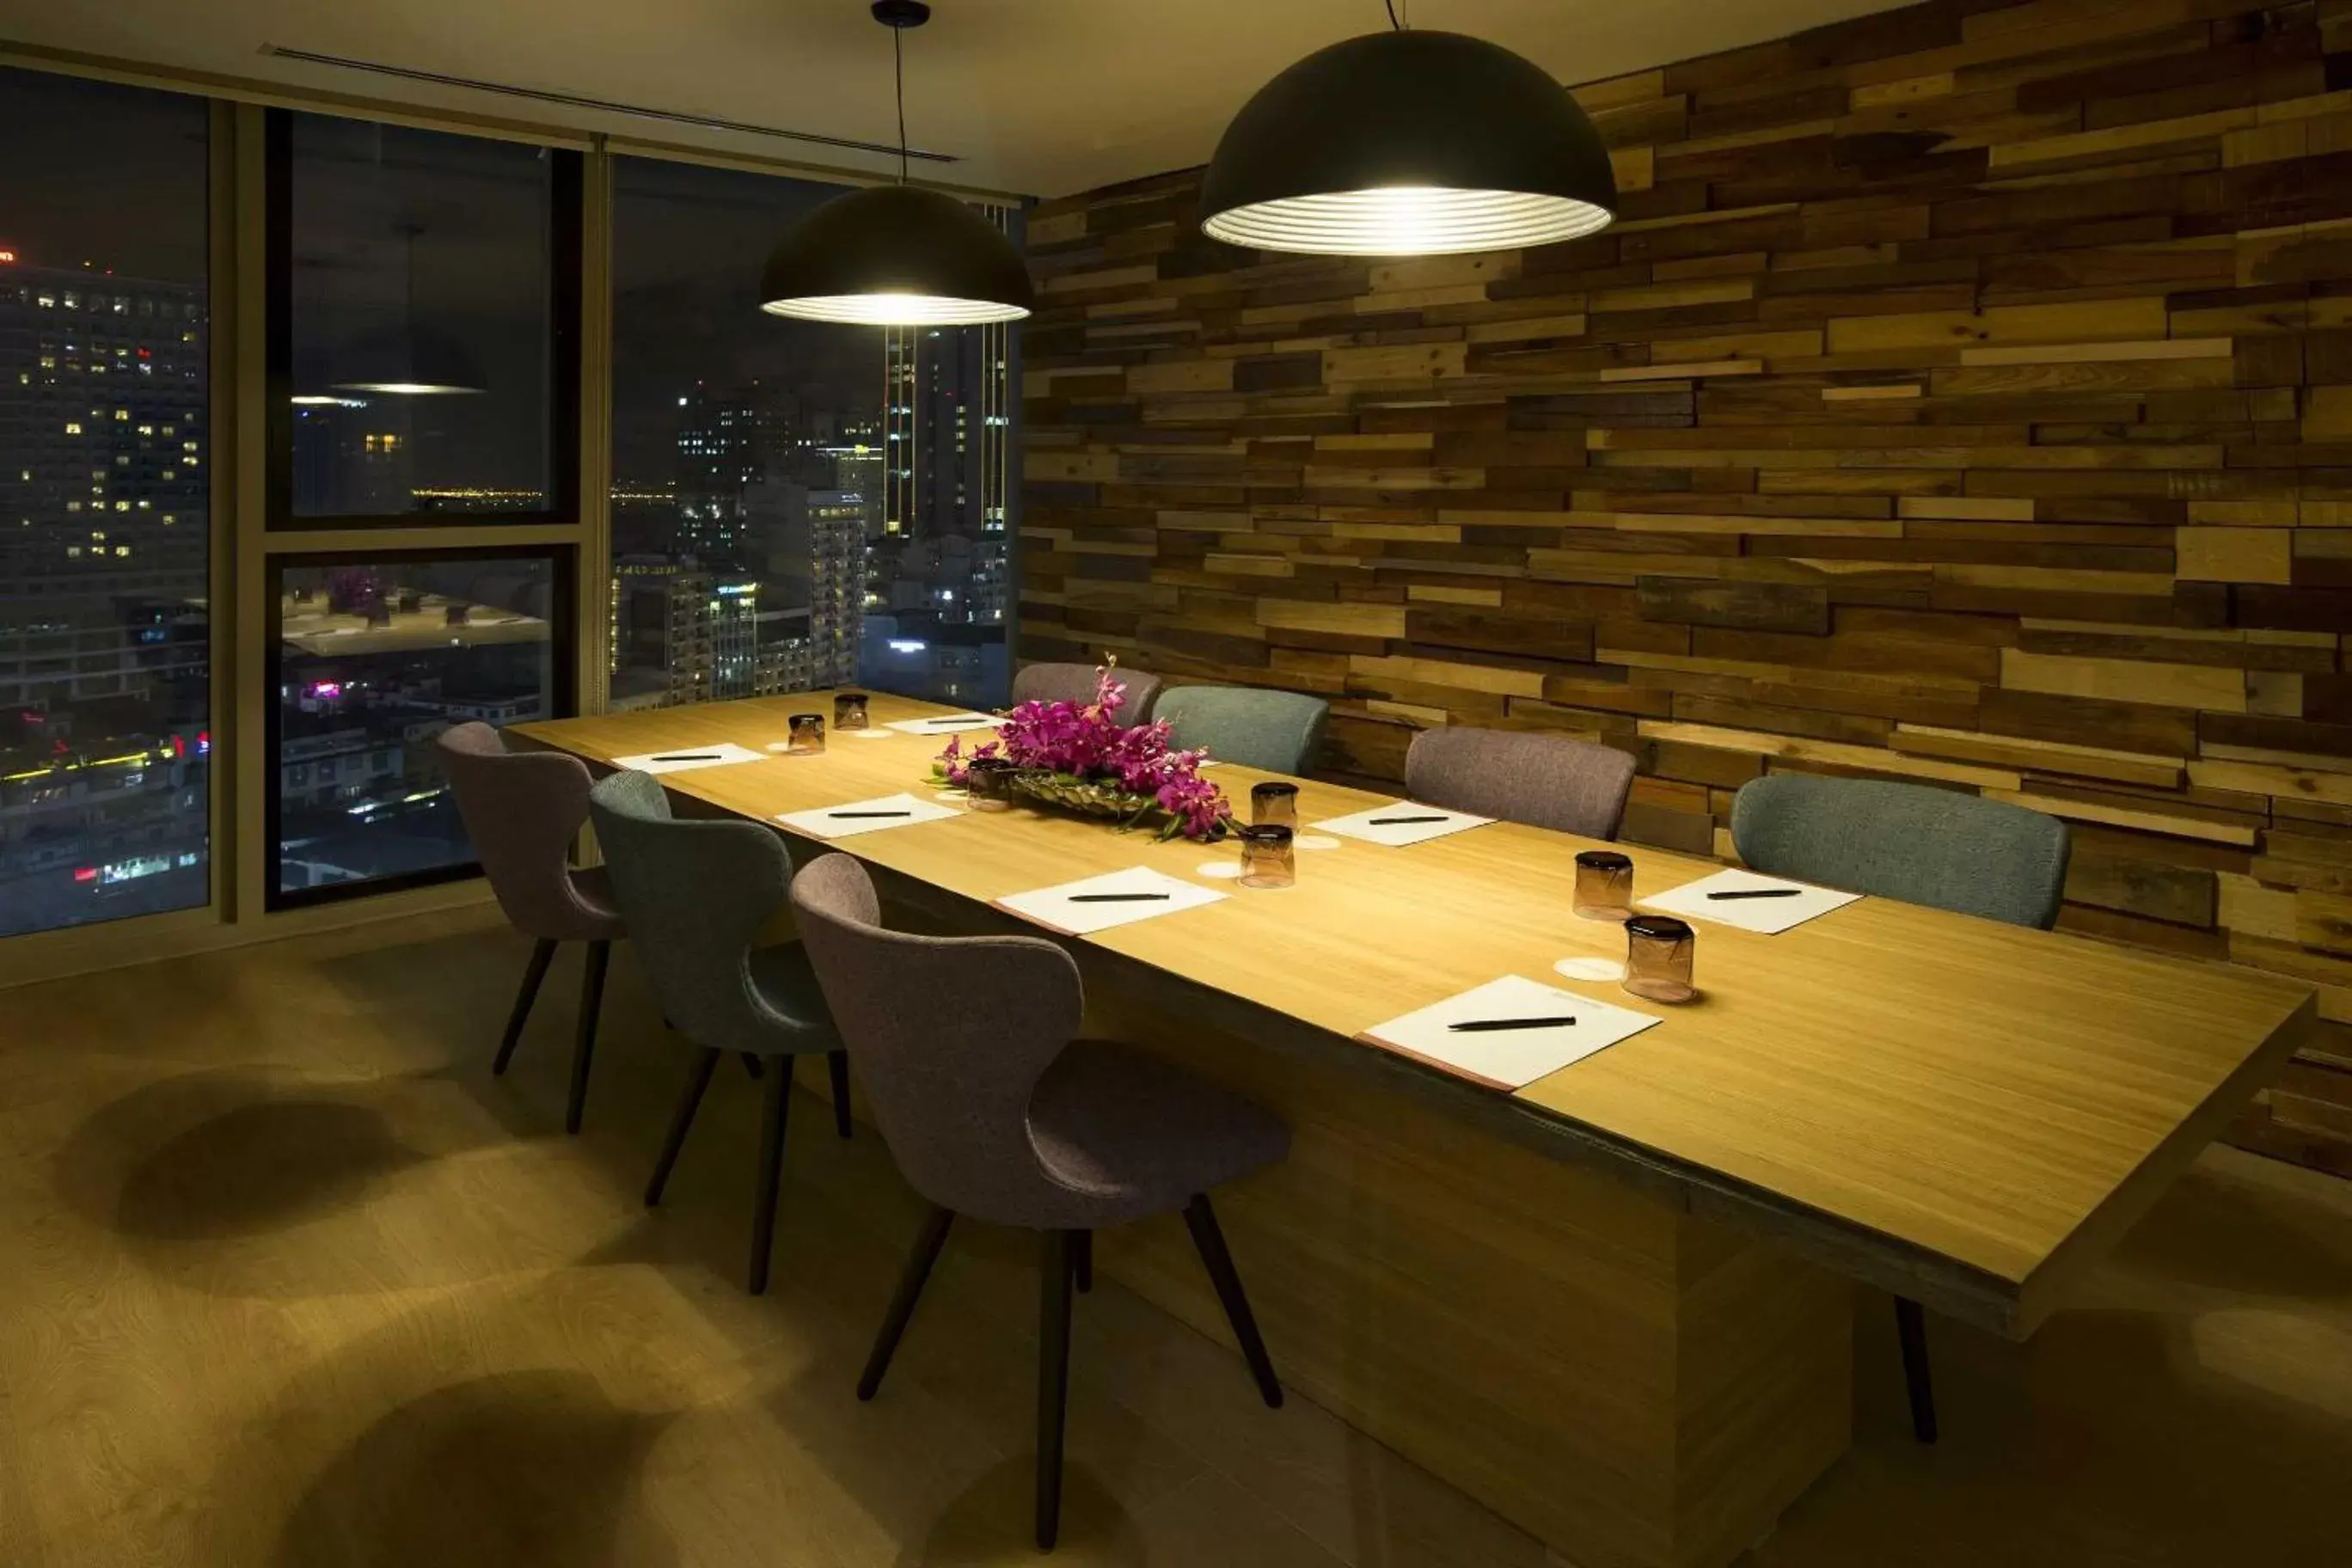 Meeting/conference room in Liberty Central Saigon Citypoint